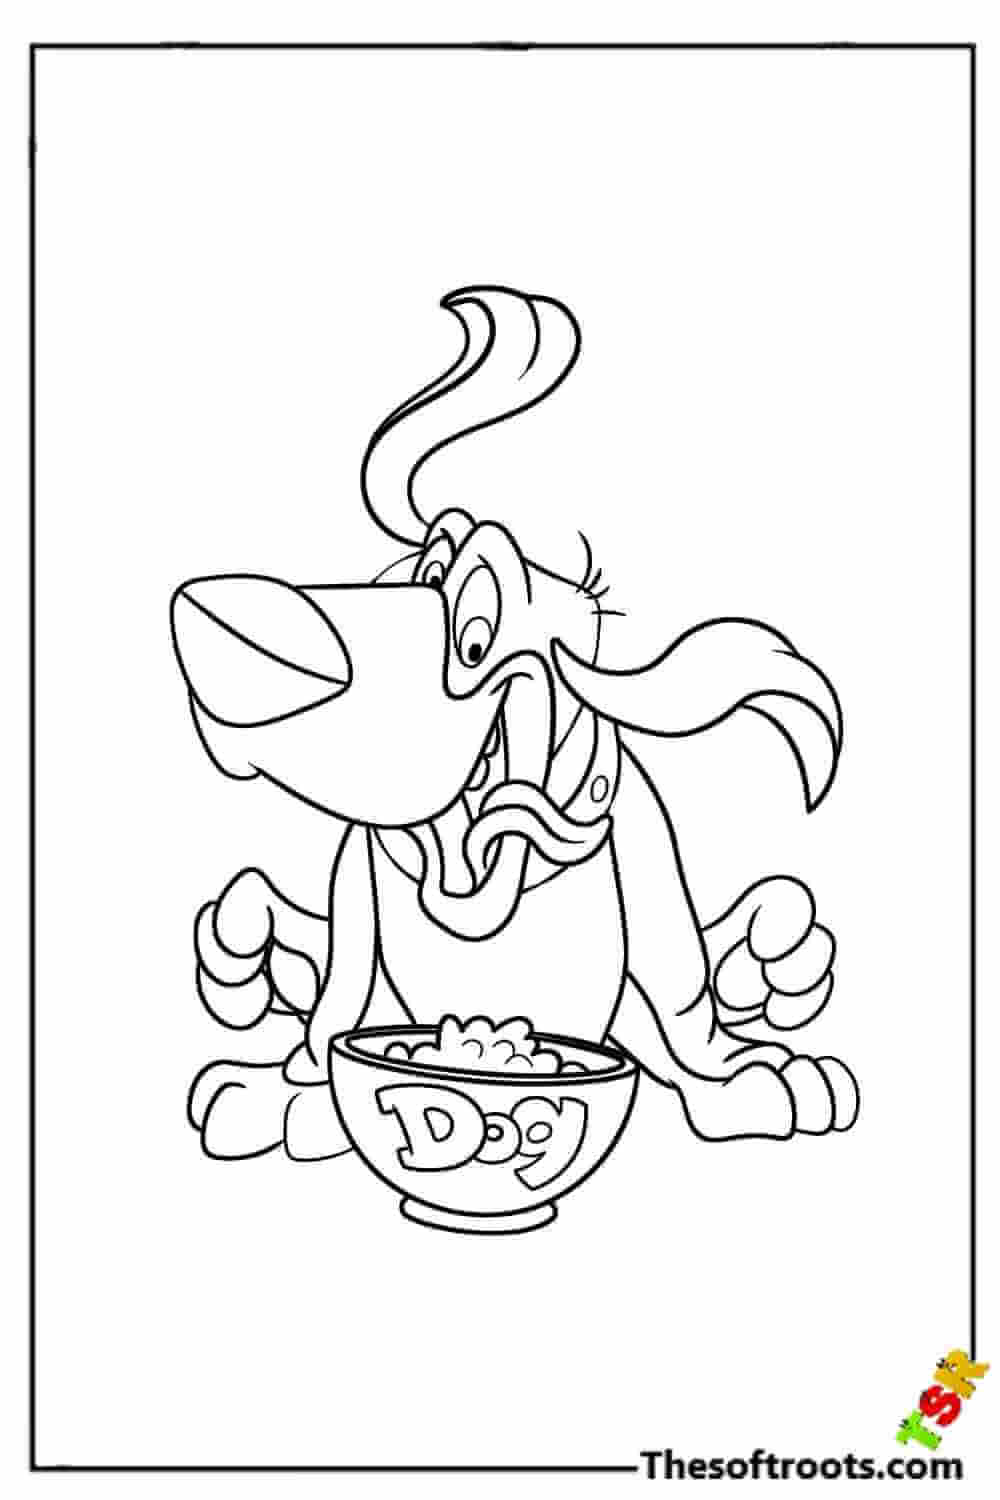 Hungry Puppy coloring pages